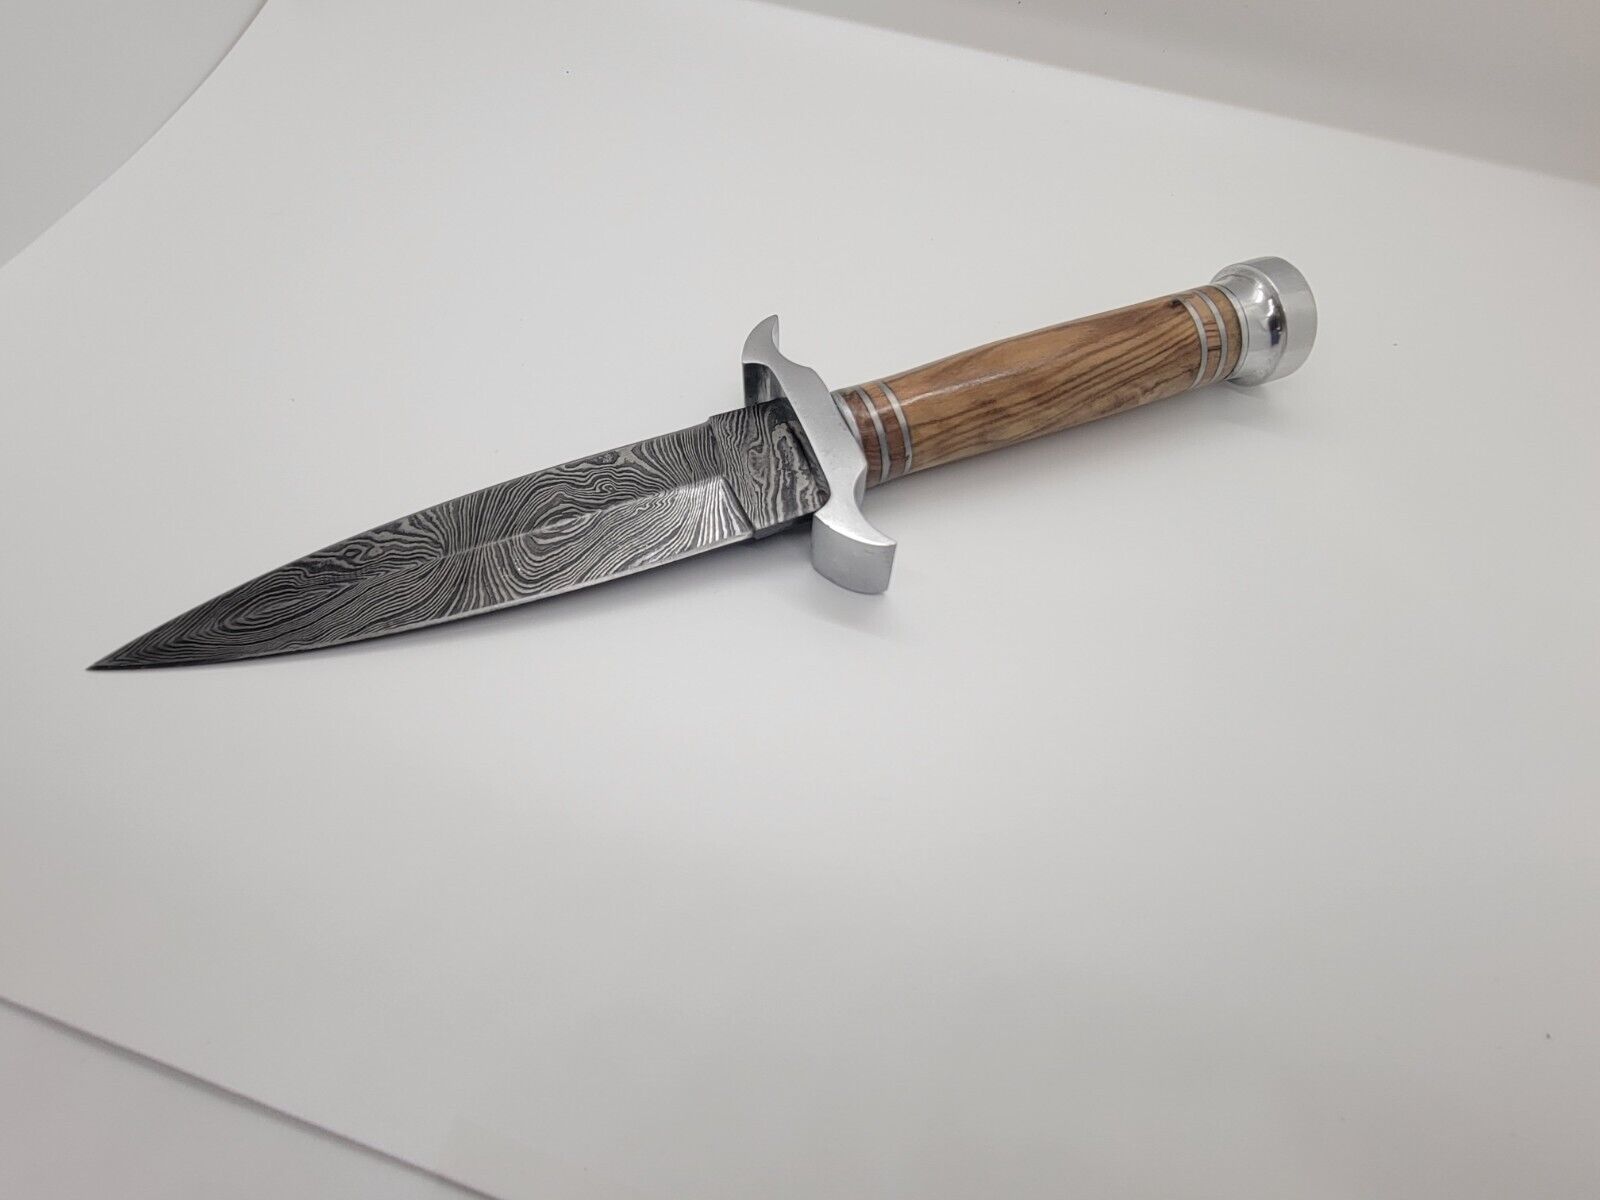 Ducks Unlimited 2021 exclusive Damascus knife of the year with display case